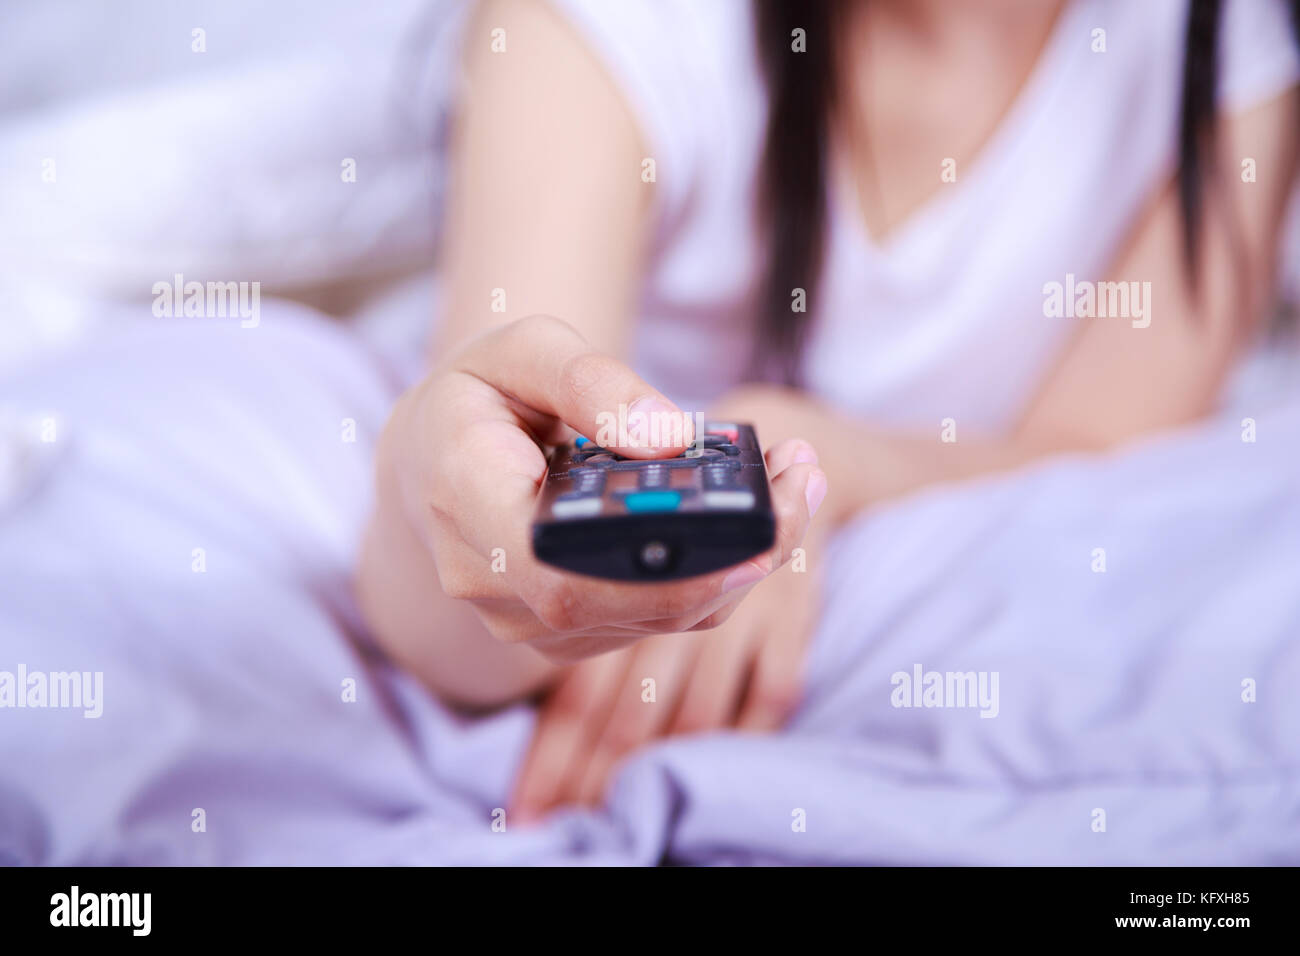 close up tv remote control on hand of woman on the bed Stock Photo